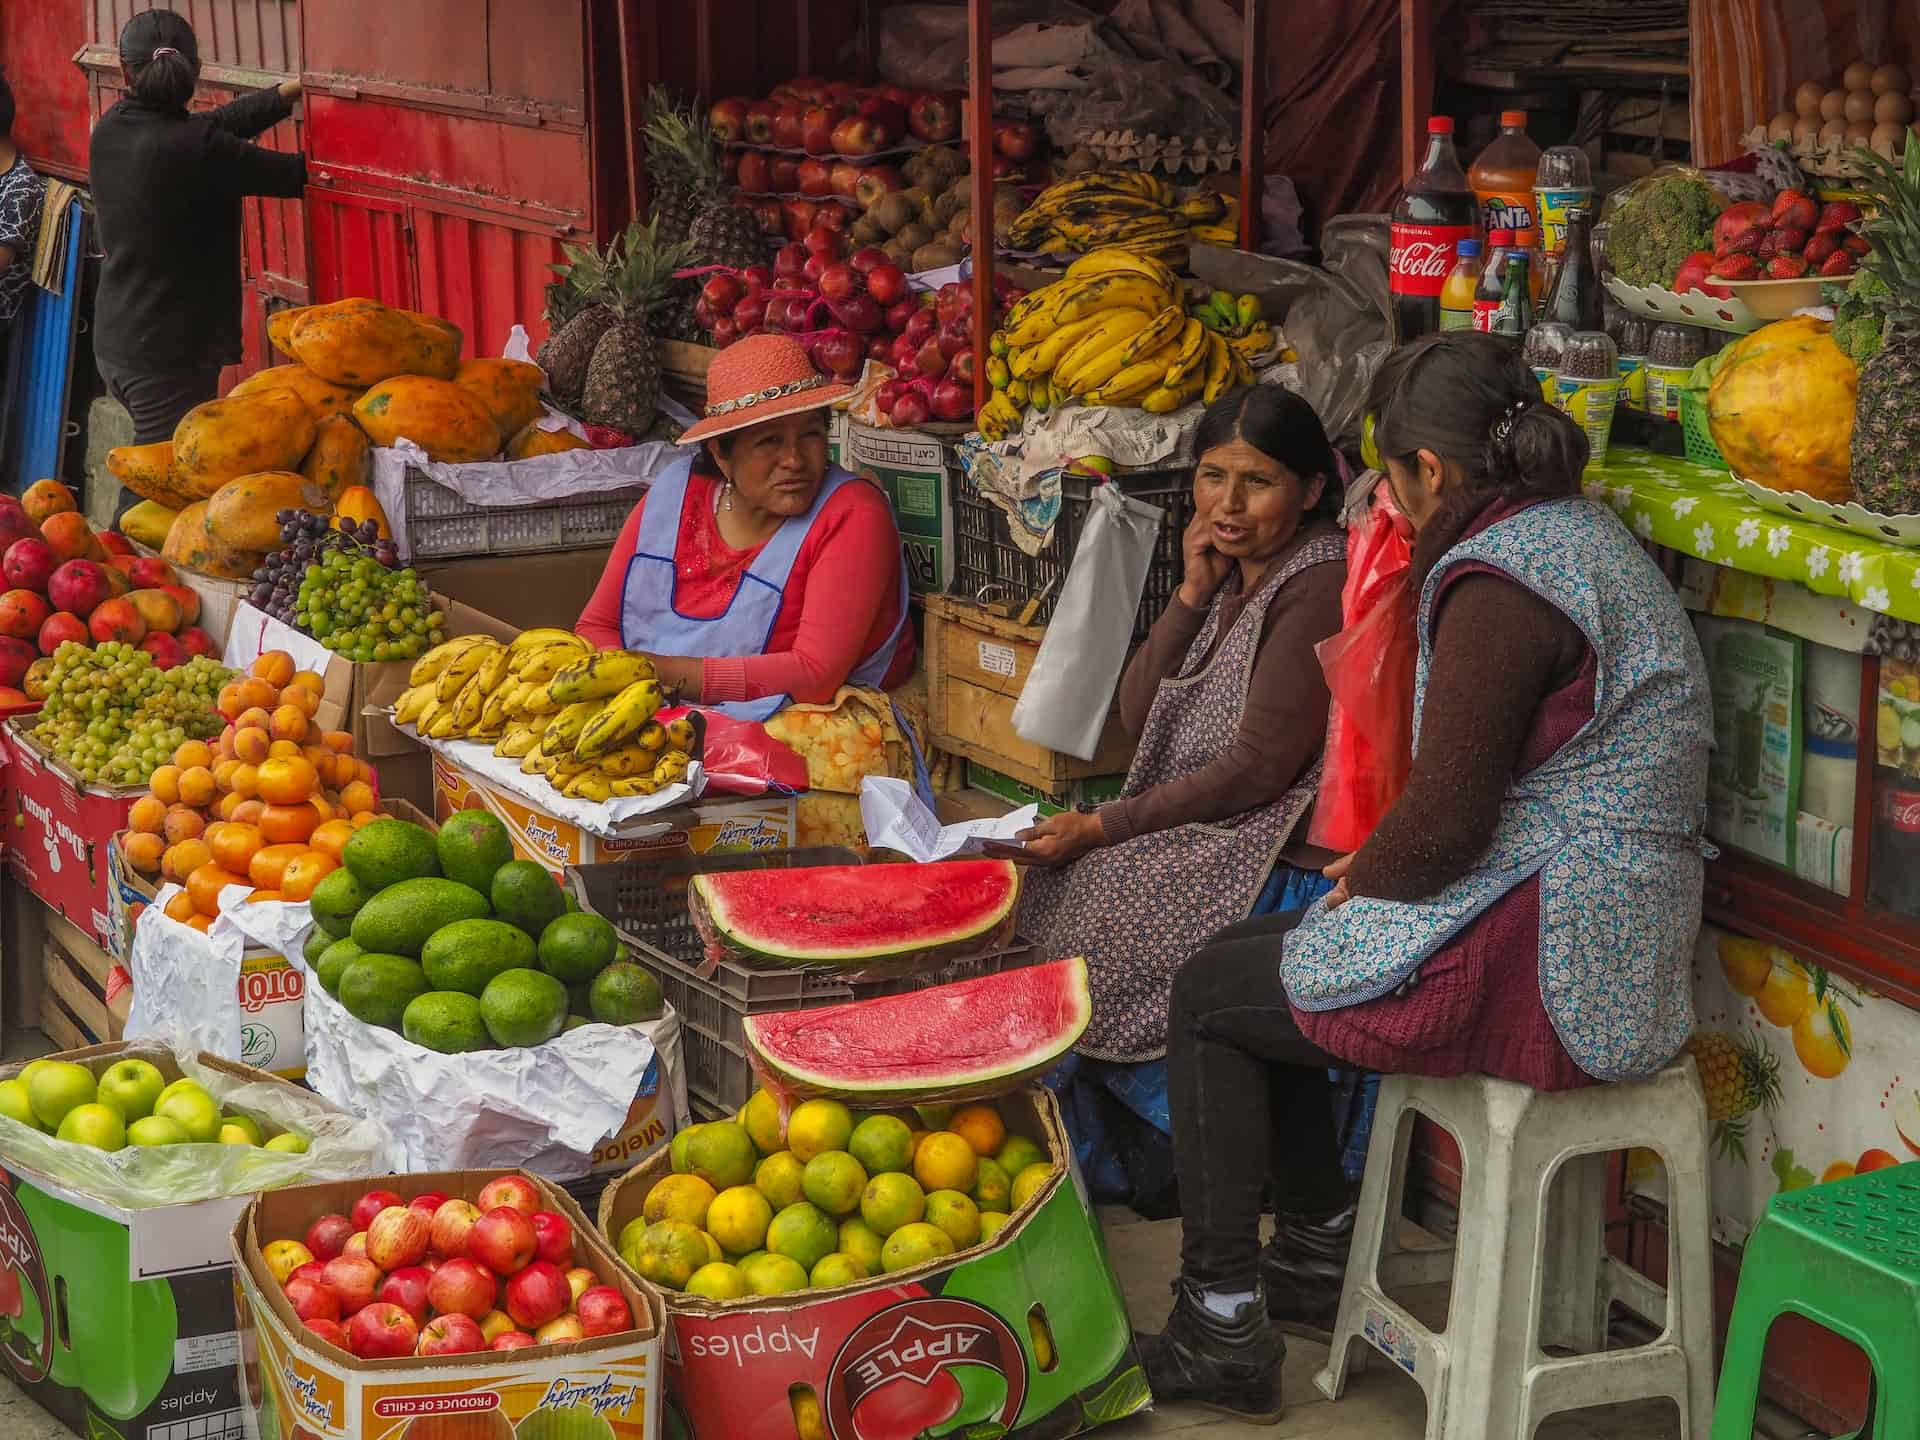 Best things to do in La Paz Bolivia - David Karamanis - Ladies selling fruit on a street shopping stand by Lesly Derksen on Unsplash